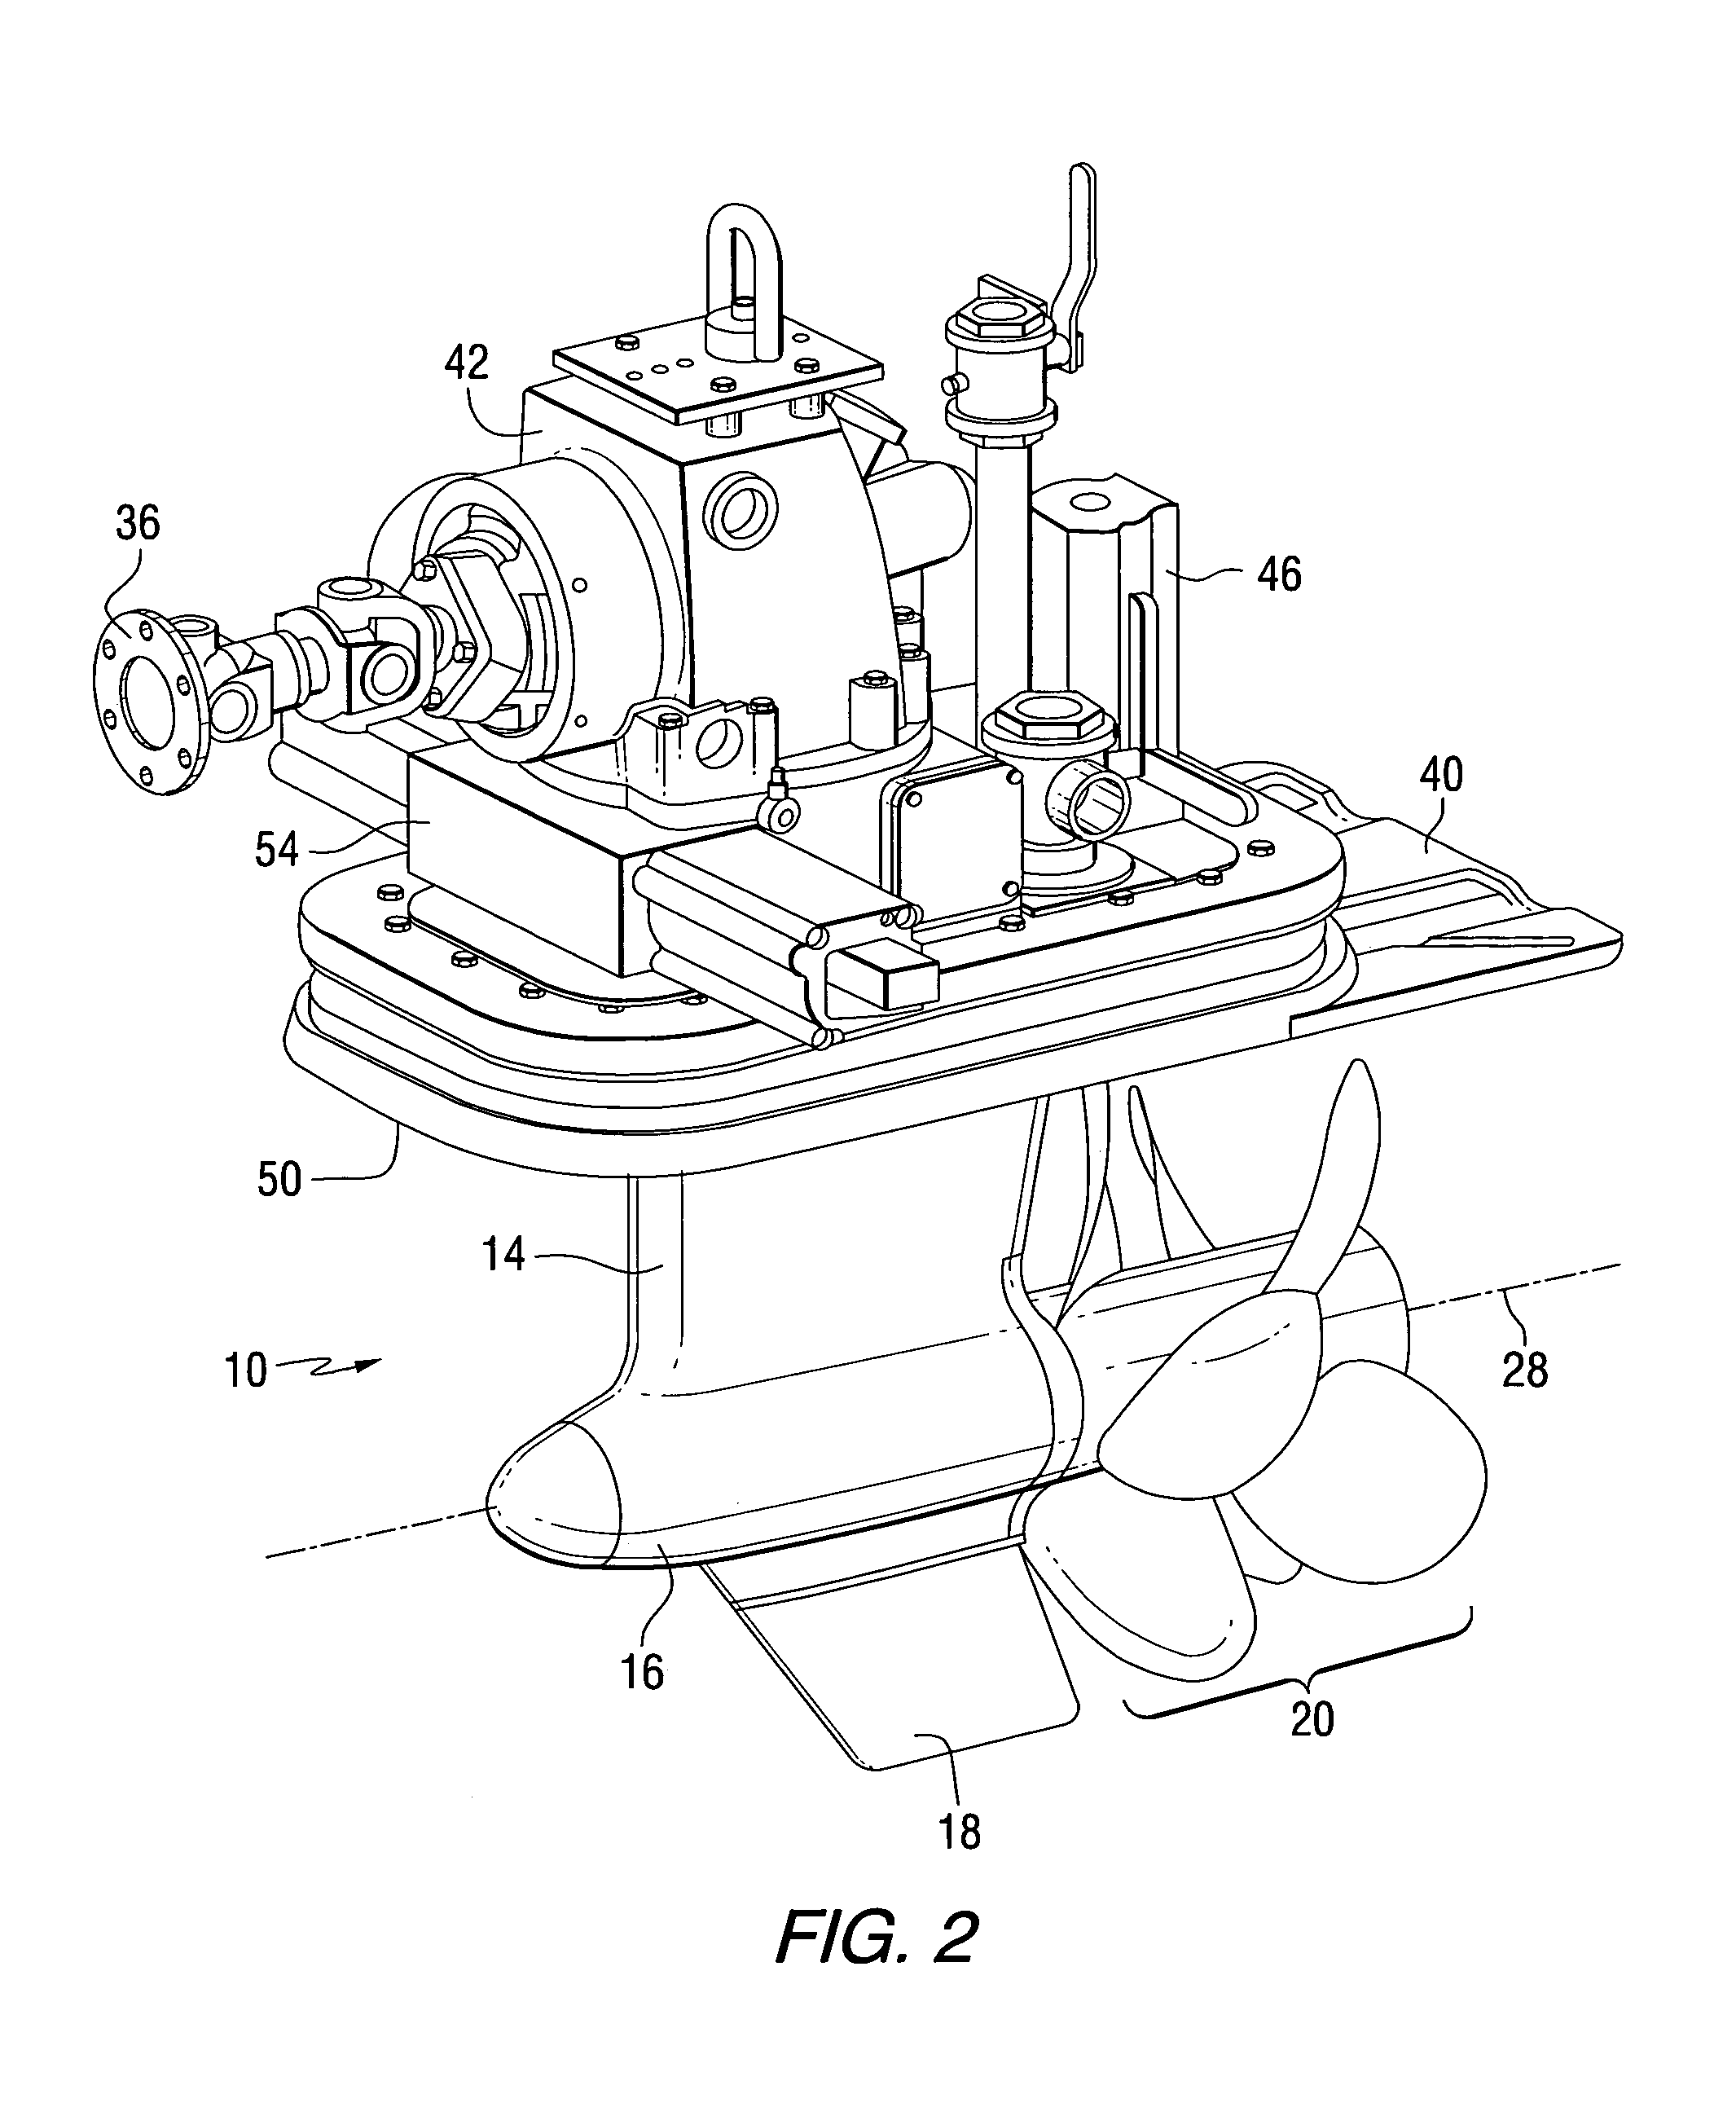 Method for braking a vessel with two marine propulsion devices